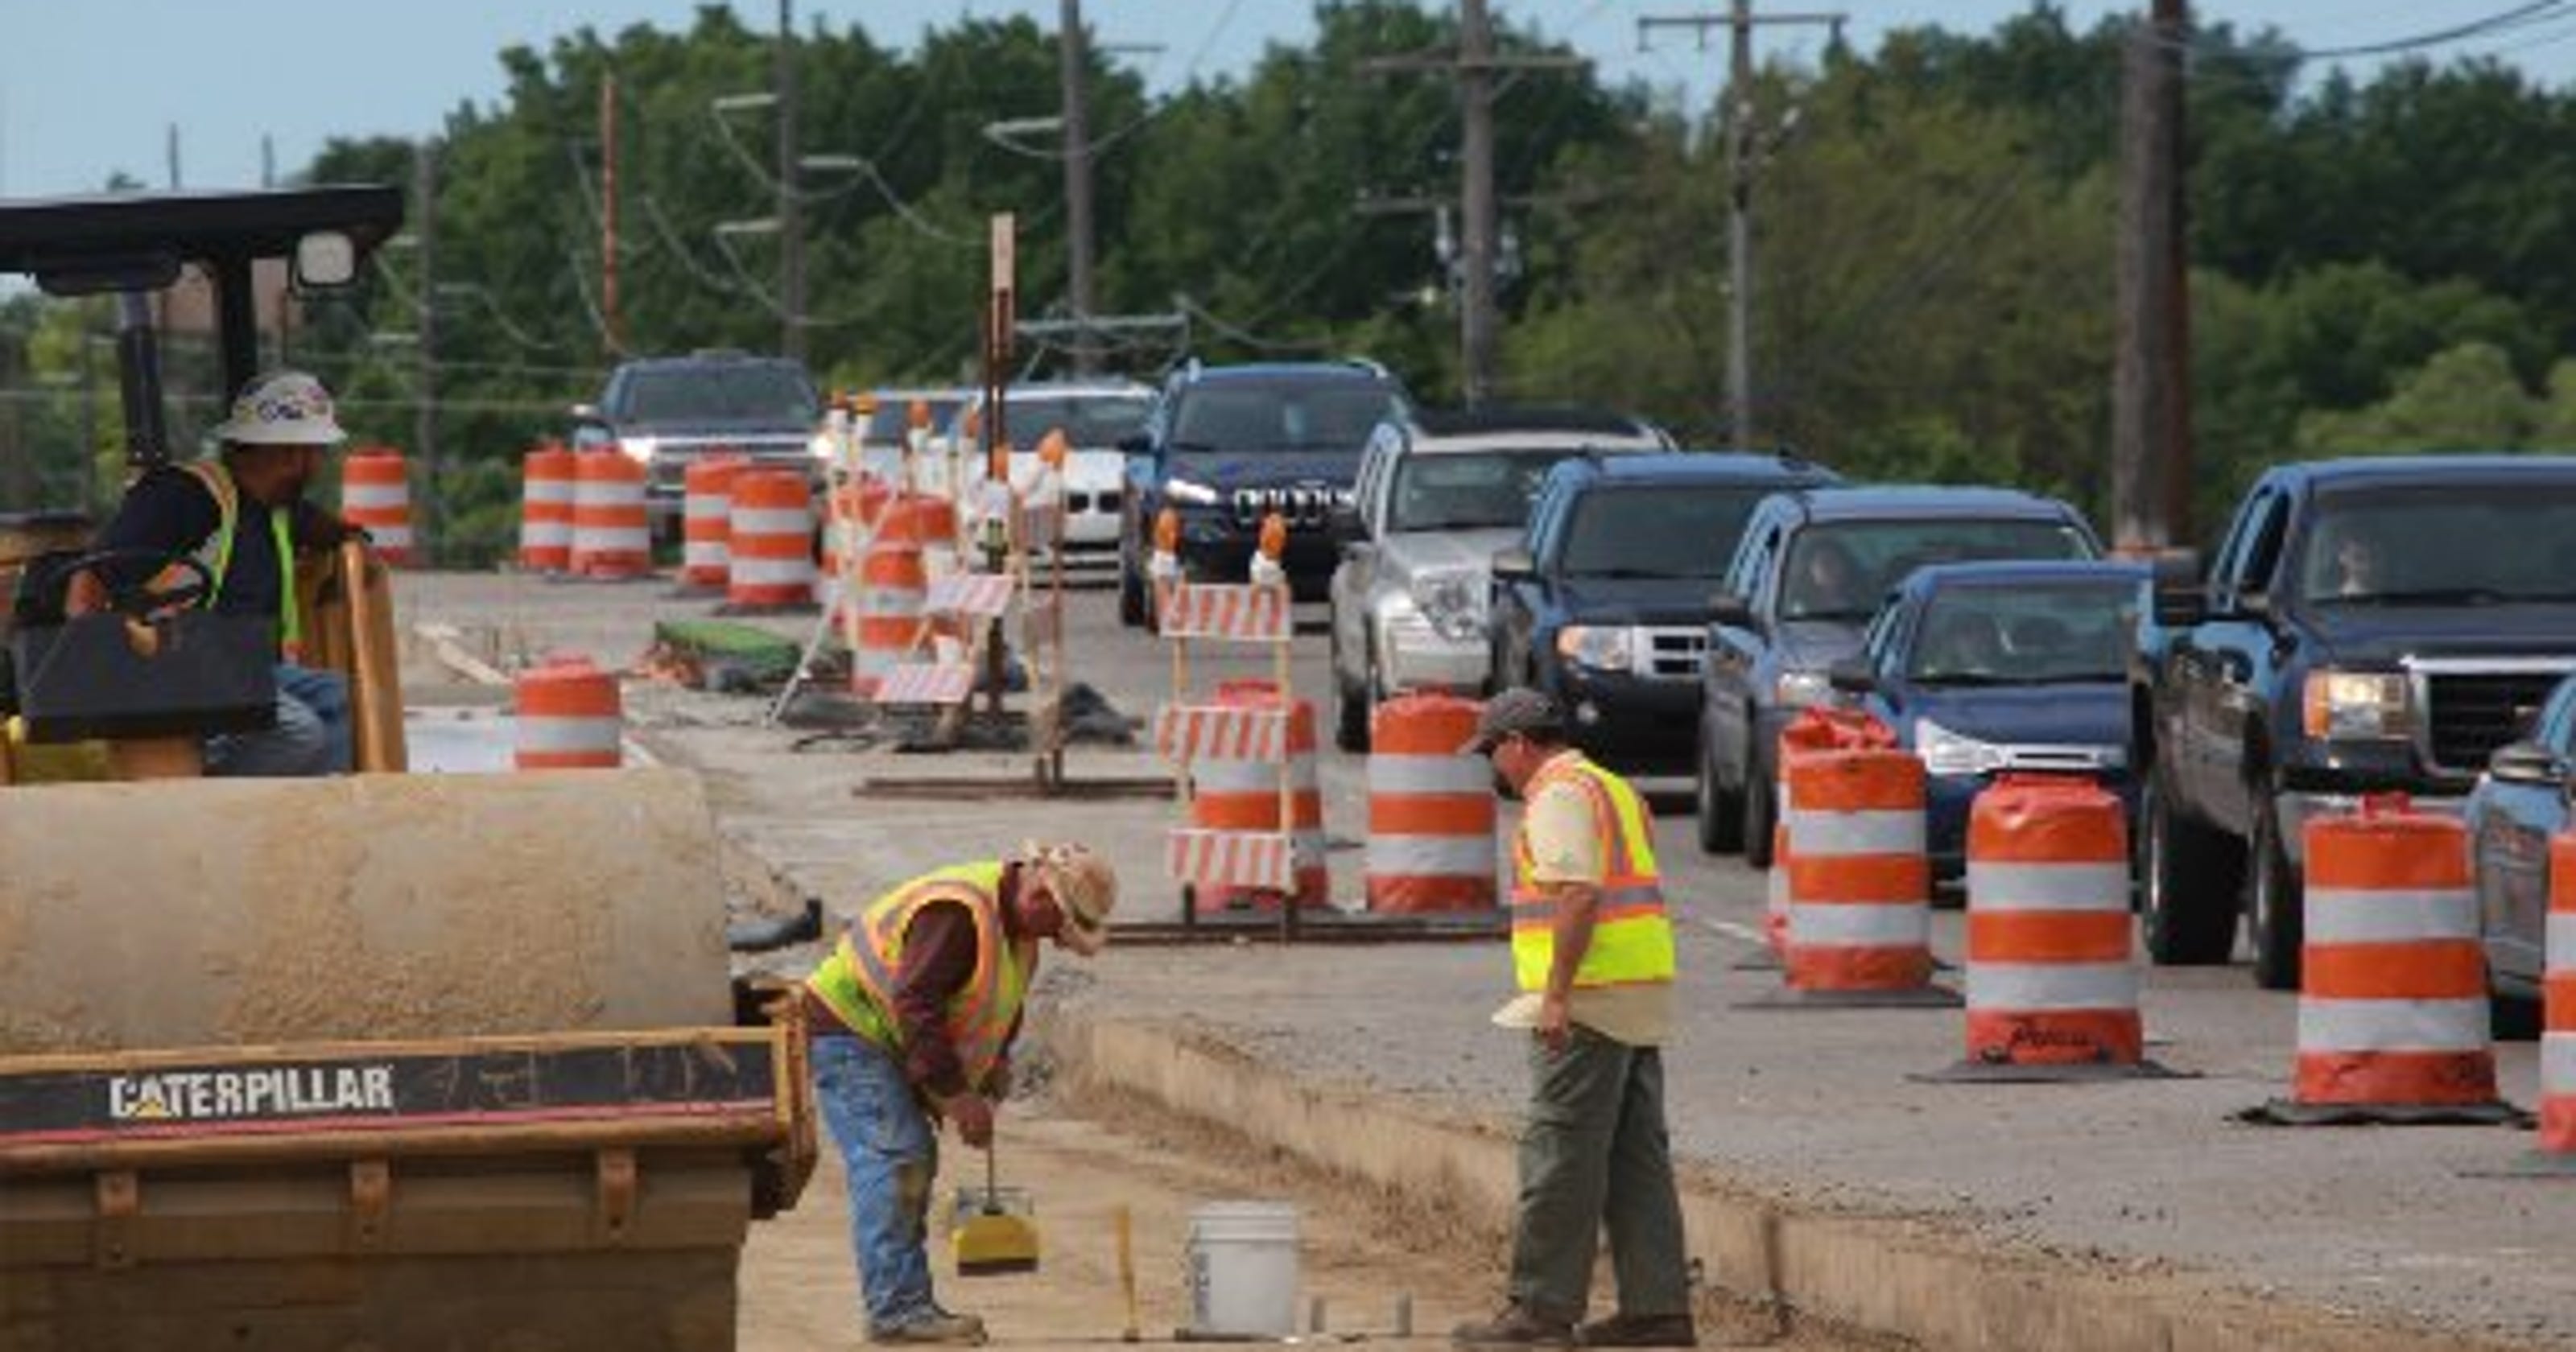 Snyder No End In Sight For Road Construction Standoff